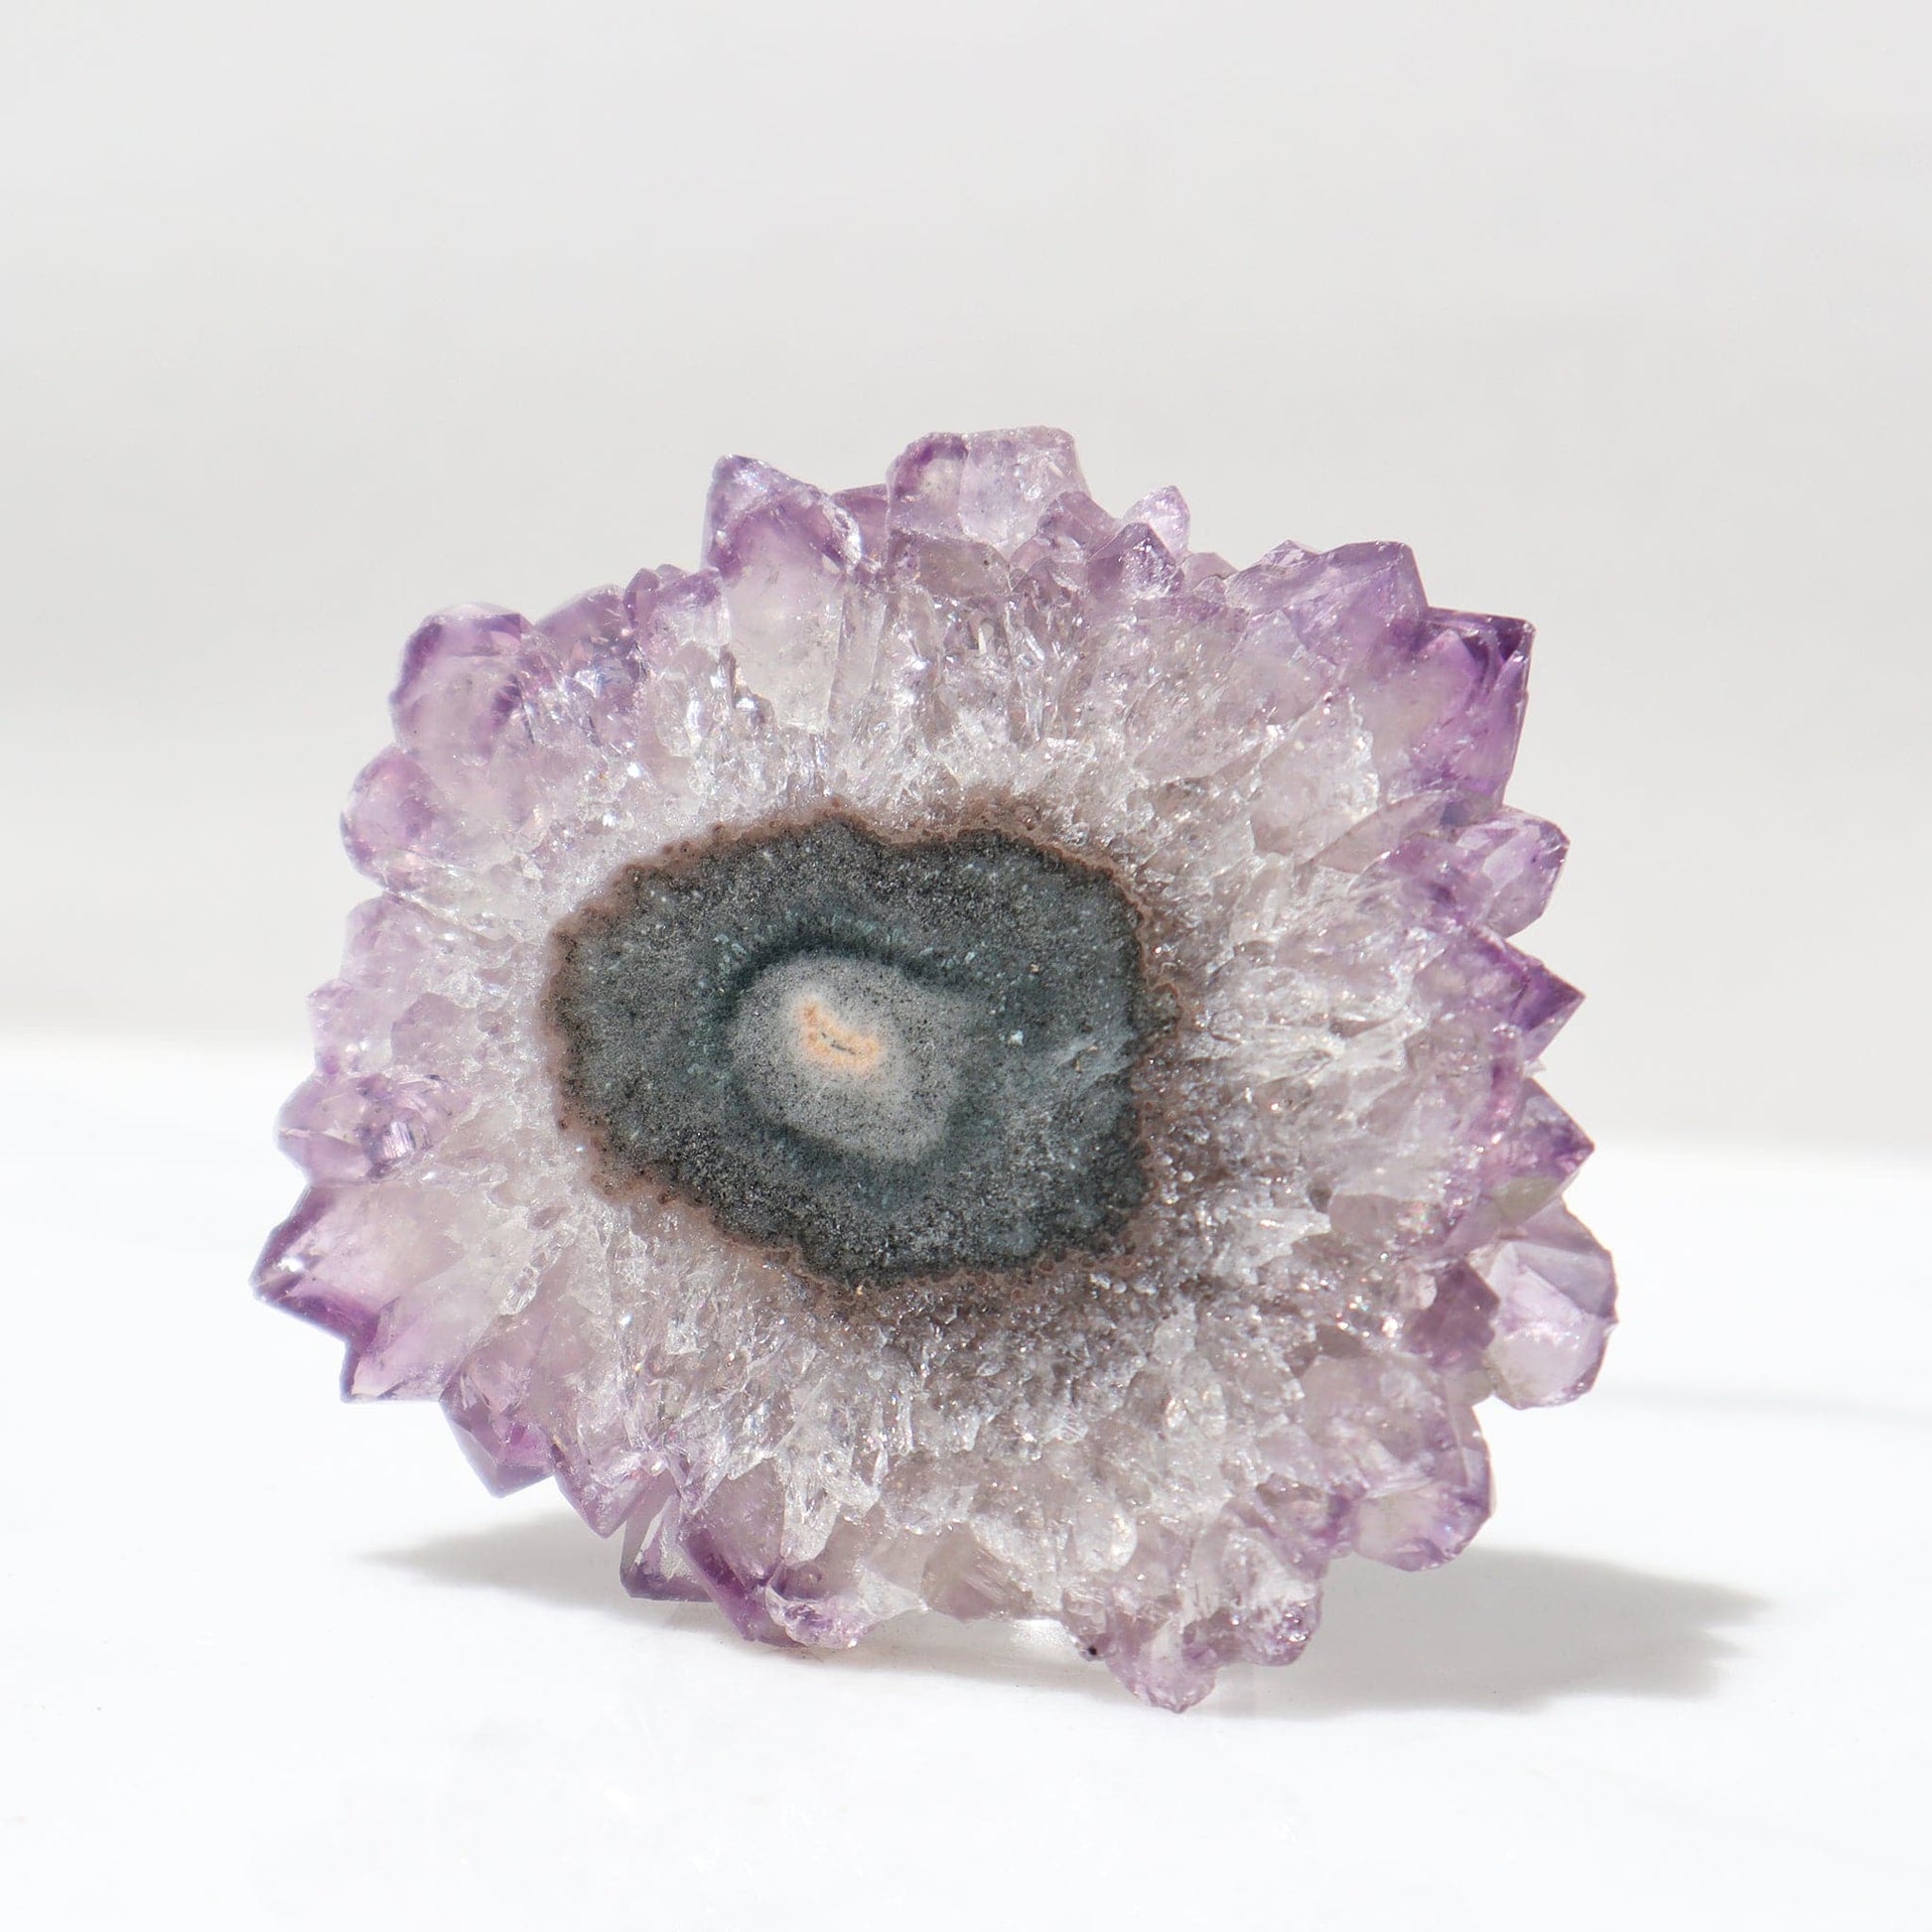 Stalactite flower formed of a bluish-green agate center and divine purple quartz, with yet more intense purple color on its peaks, it was polished to perfection by experienced locals in Uruguay to reveal it all.    